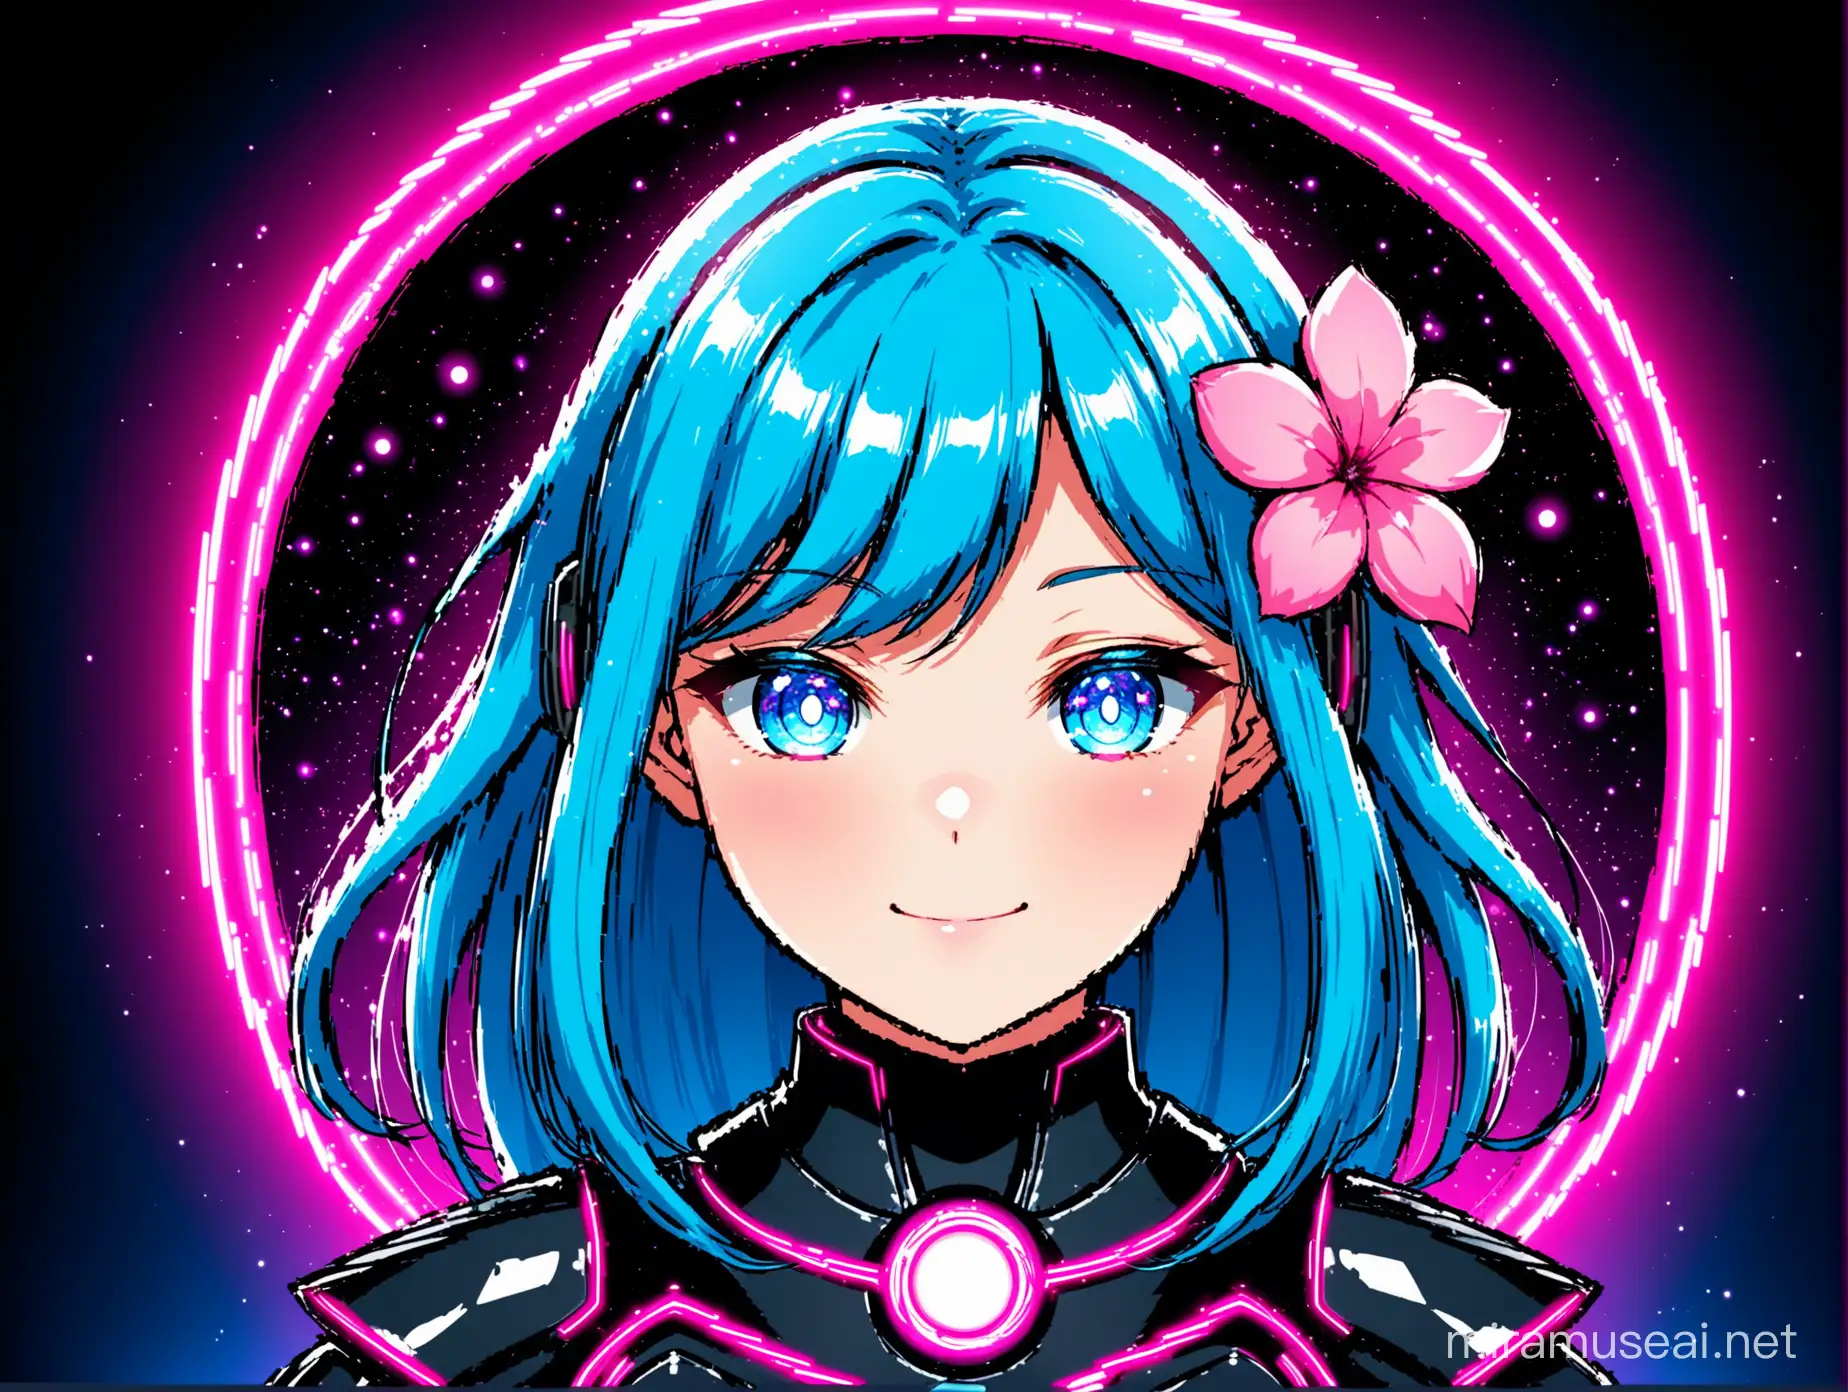 a anime japanese style girl with long blue hair and a pink flower in her hair, smiling with pink cheeks and wearing futuristic black armour with neon blue trim, looking on the front wise, background is a centered circular vignette from blue in center to black at edges, simple vector
